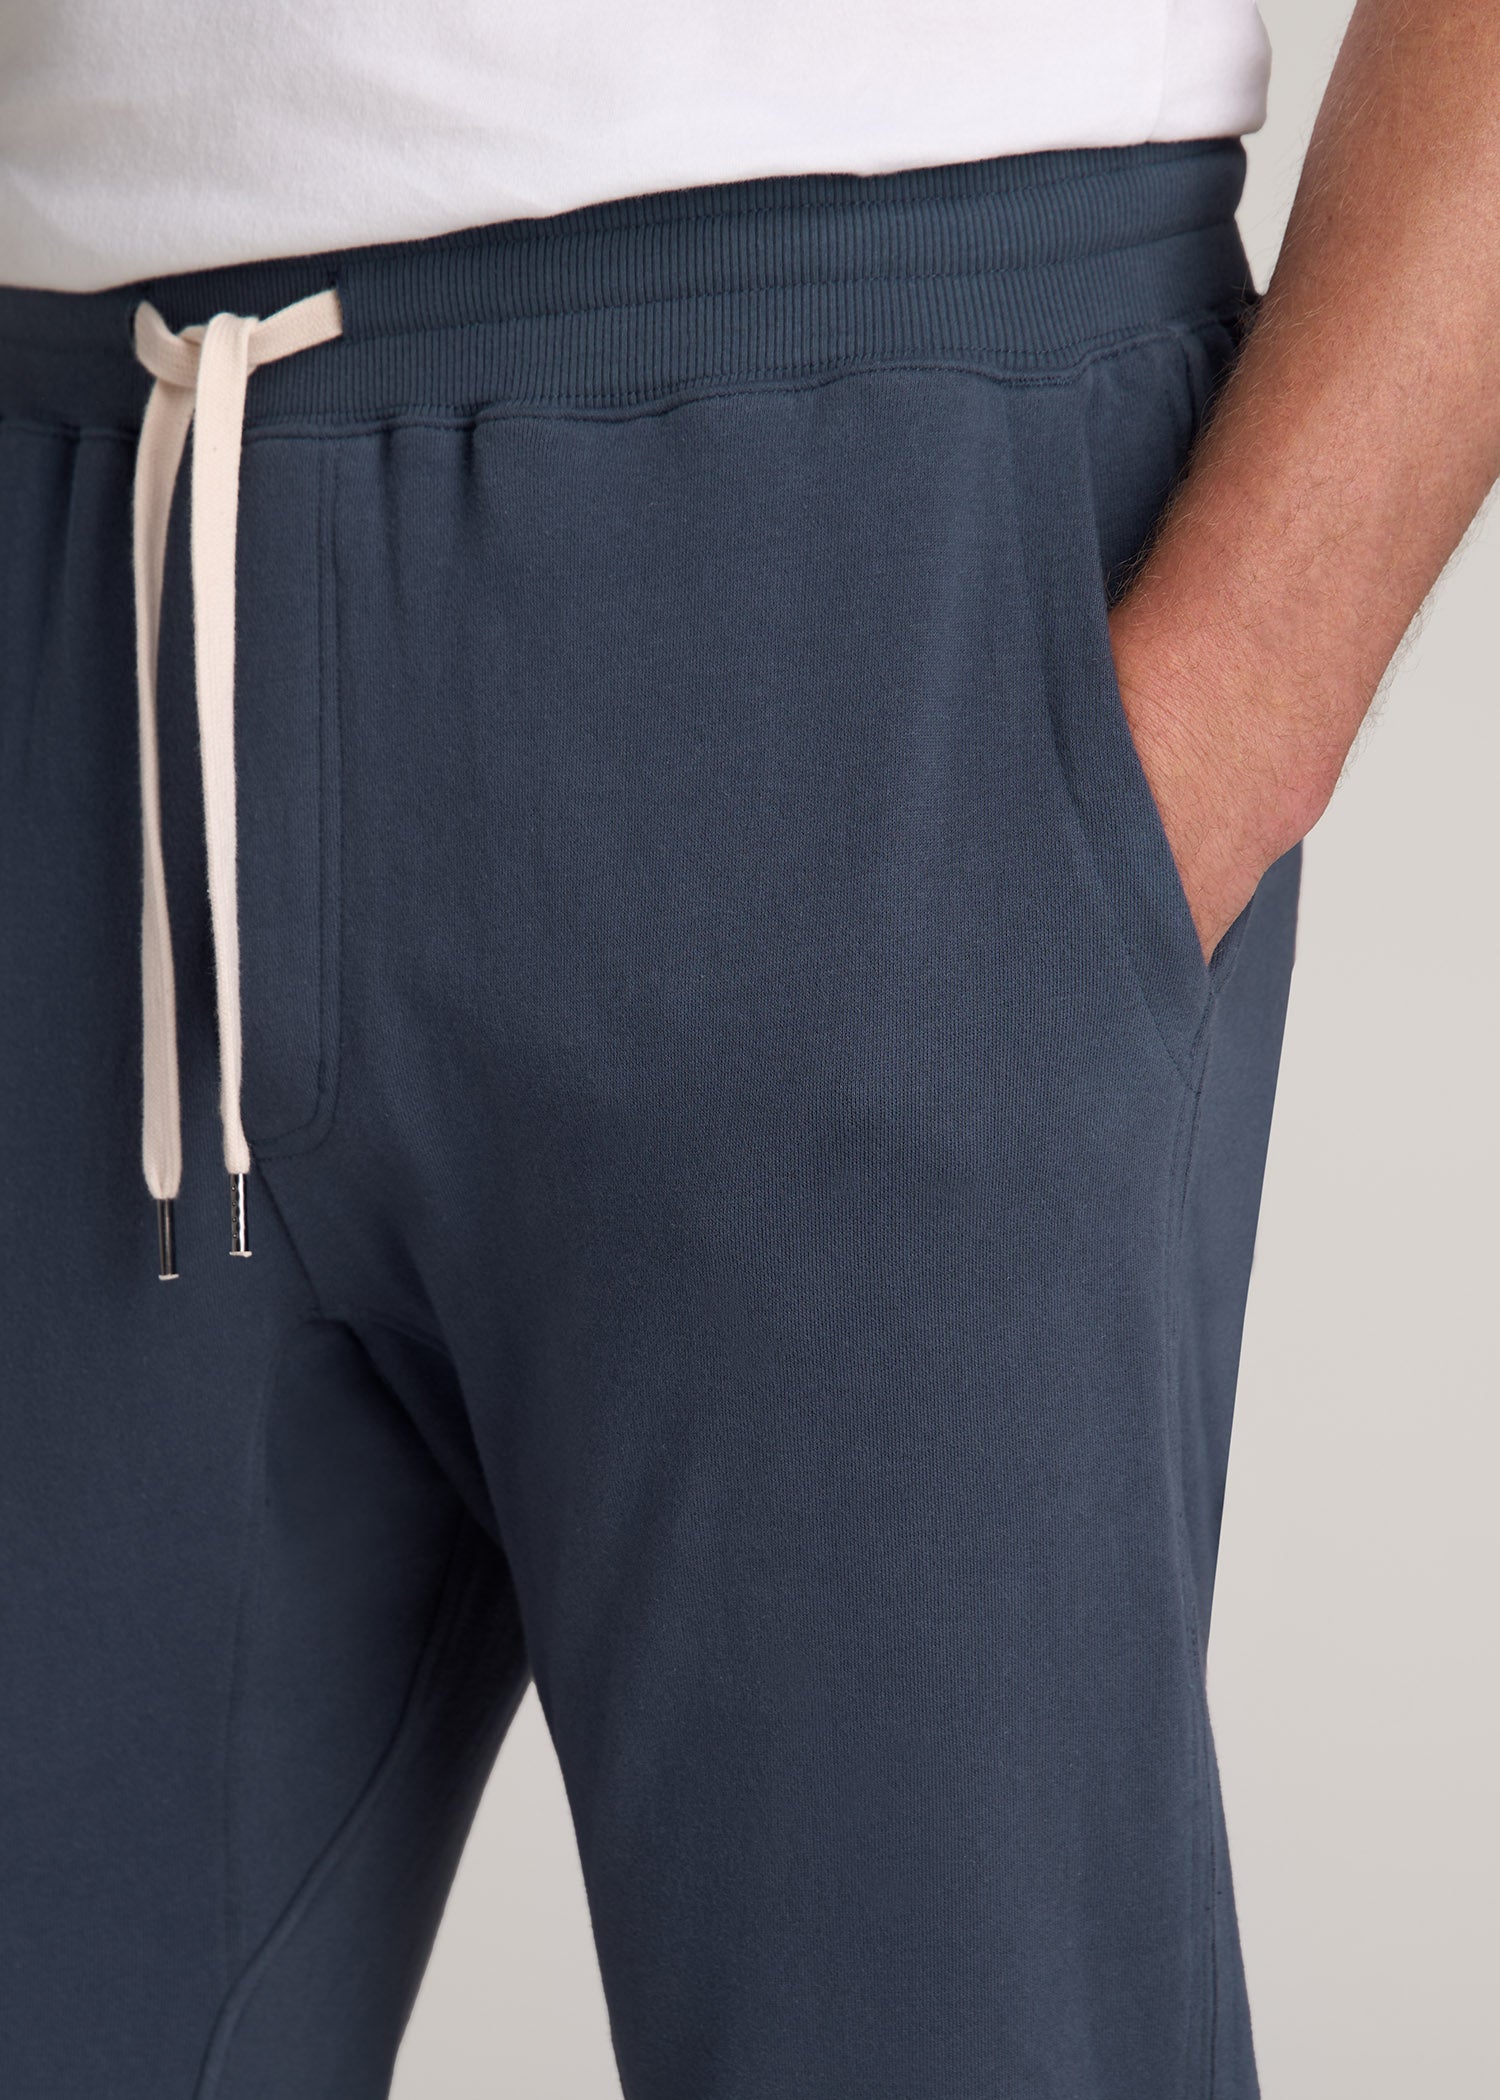 LJ Brushed Terrycloth Pants for Tall Men | American Tall